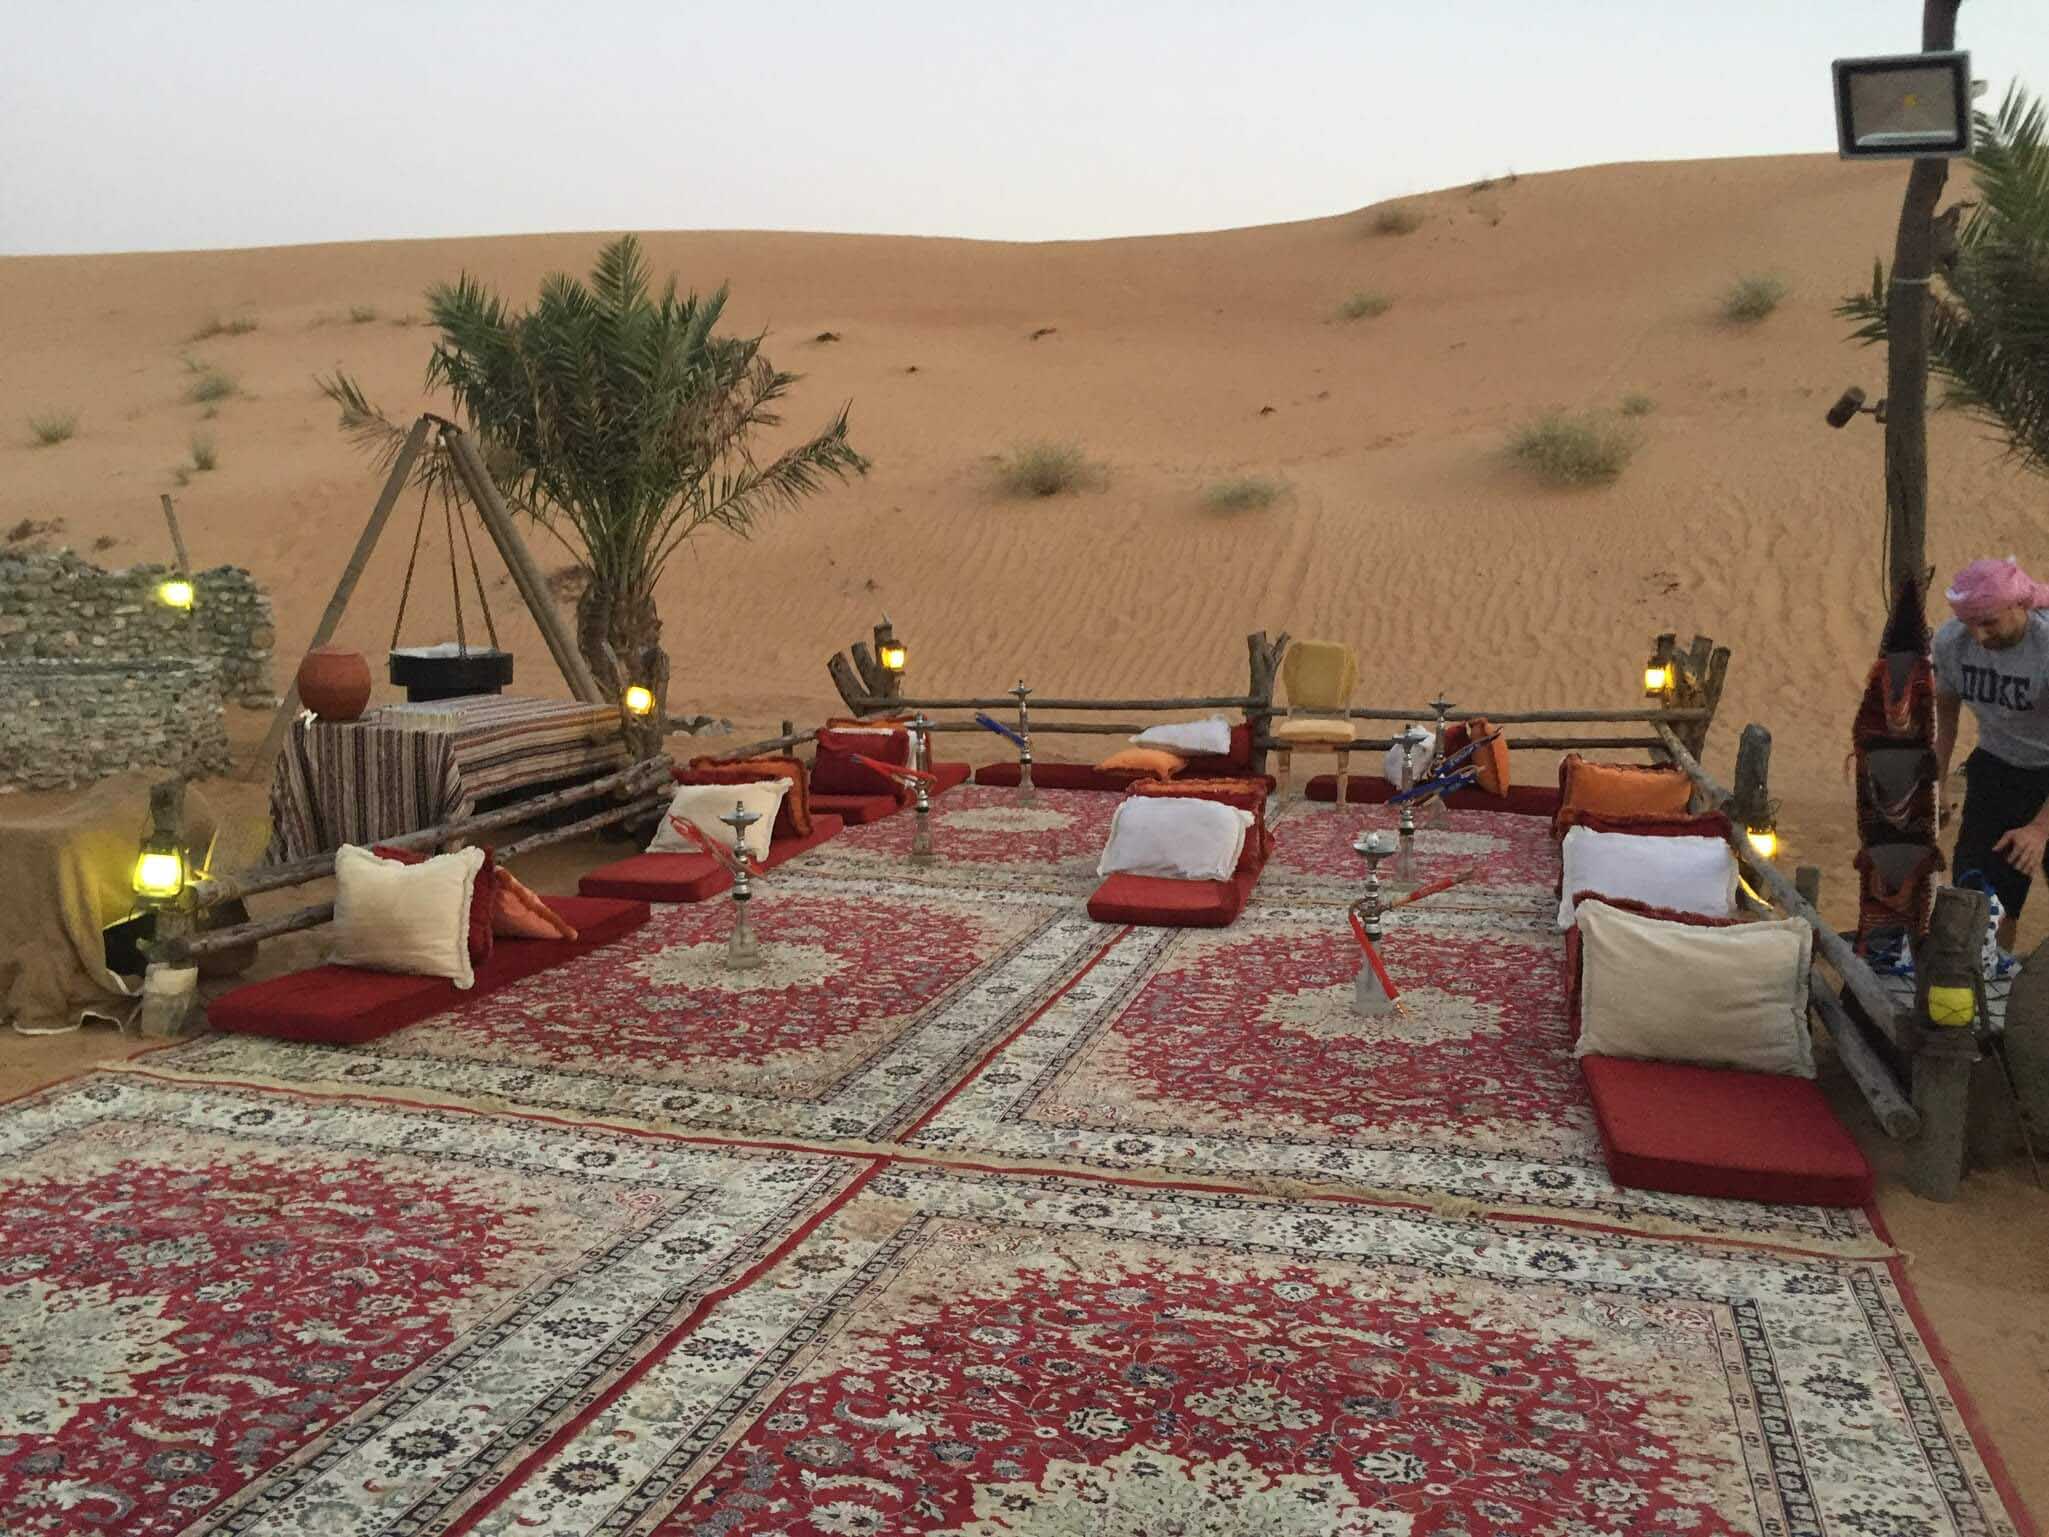 A little oasis in the desert with an amazing dinner, traditional coffees and teas, hookah, dates, music, camels, falcons, and a special performance detailing how the Arabian dancers would perform the traditional “hair dance.”